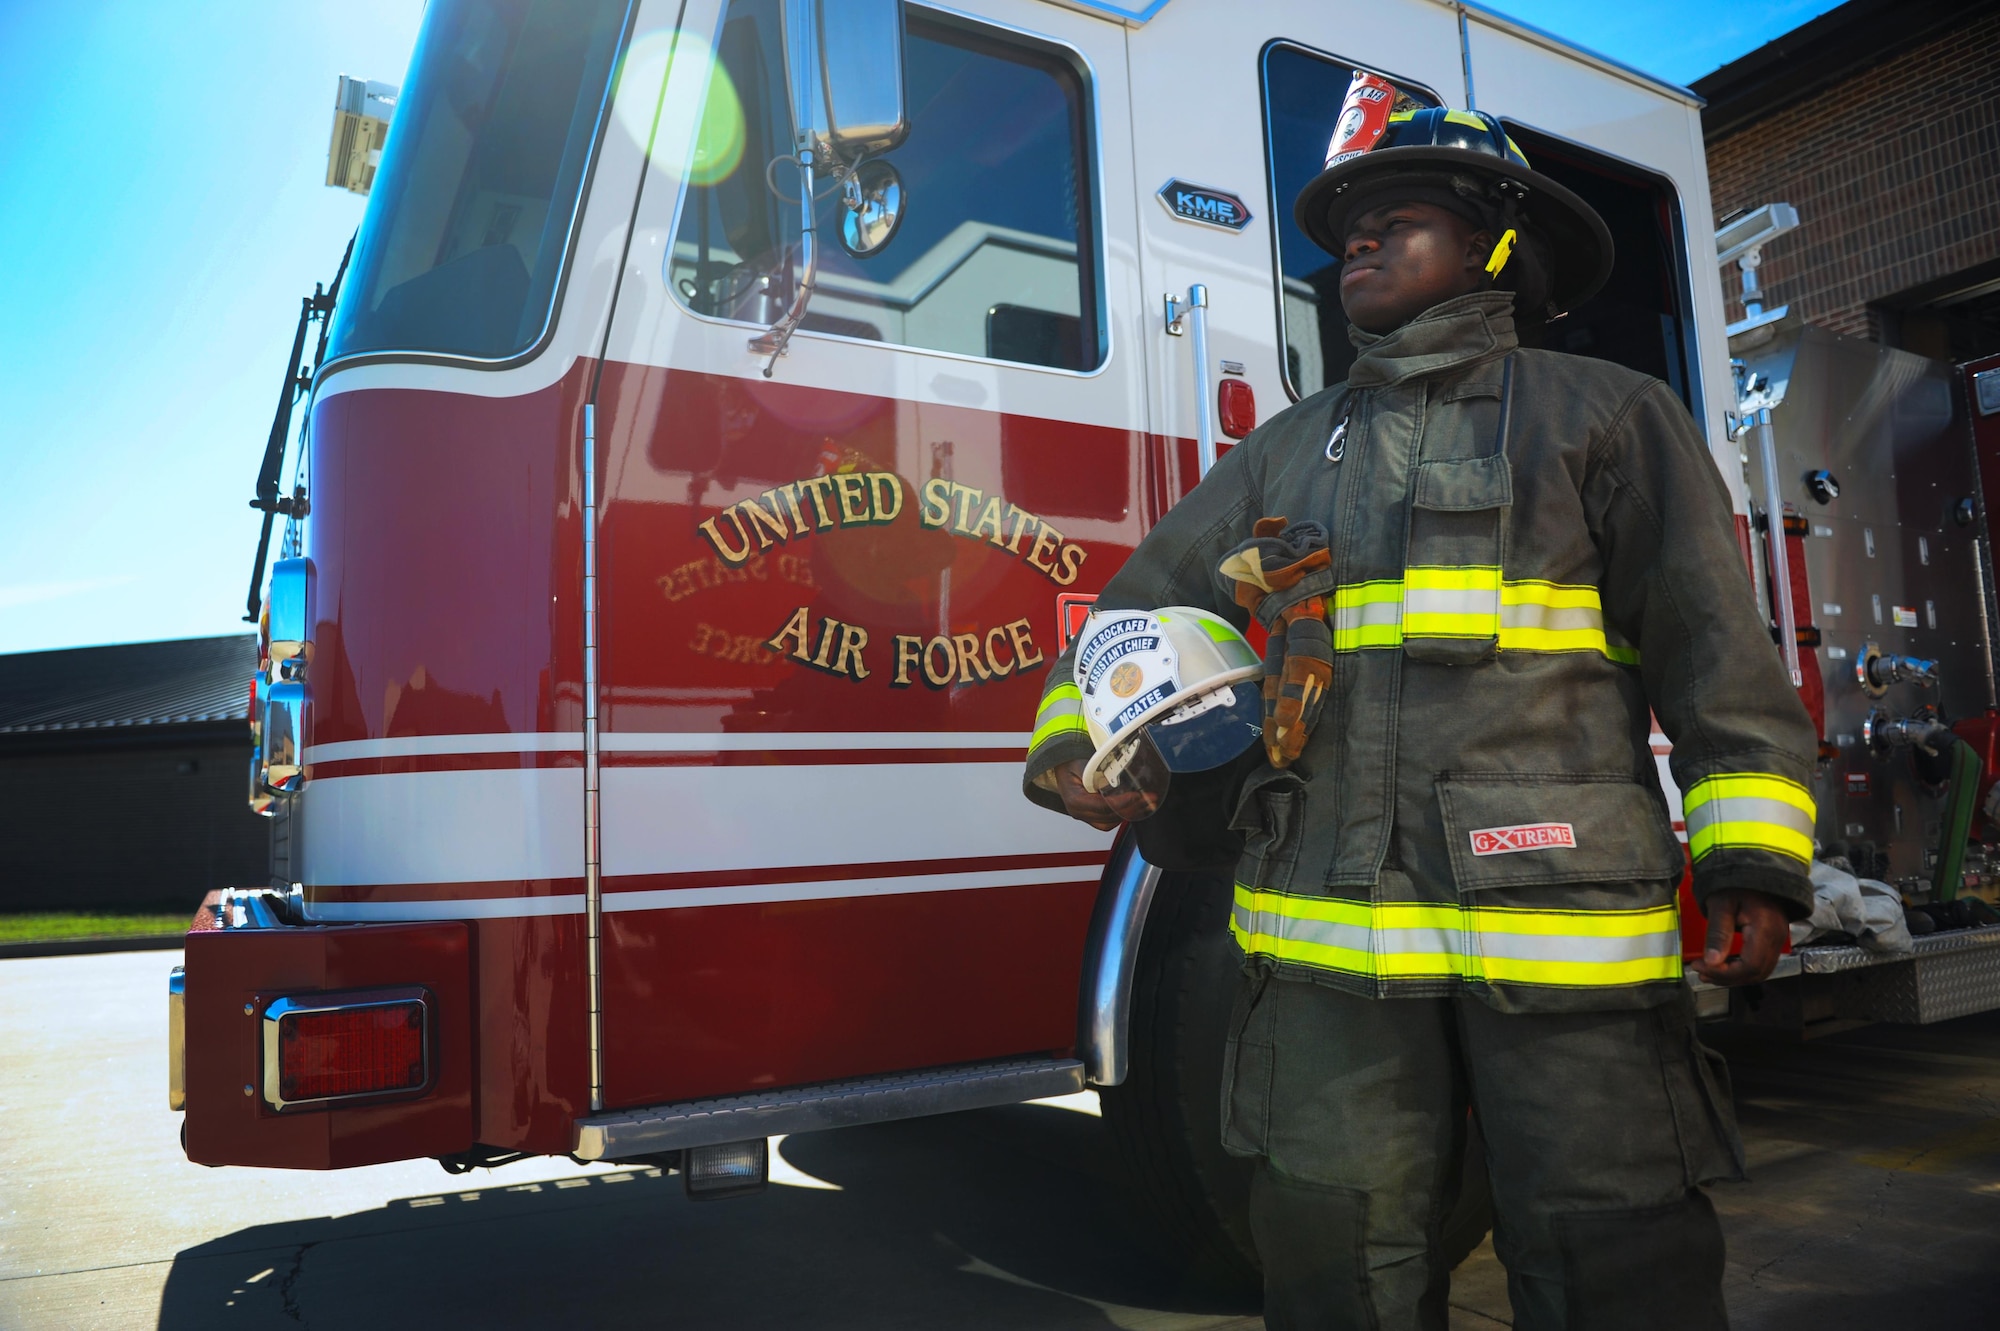 The 19th Civil Engineer Squadron Fire Department is composed of both military and civilian personnel that work as one team to protect life, property and environment within the boundaries of the Air Force installation.Military personnel wear the red and black helmet while civilian personnel wear white helmets. (U.S. Air Force photo by Airman 1st Class Codie Collins)